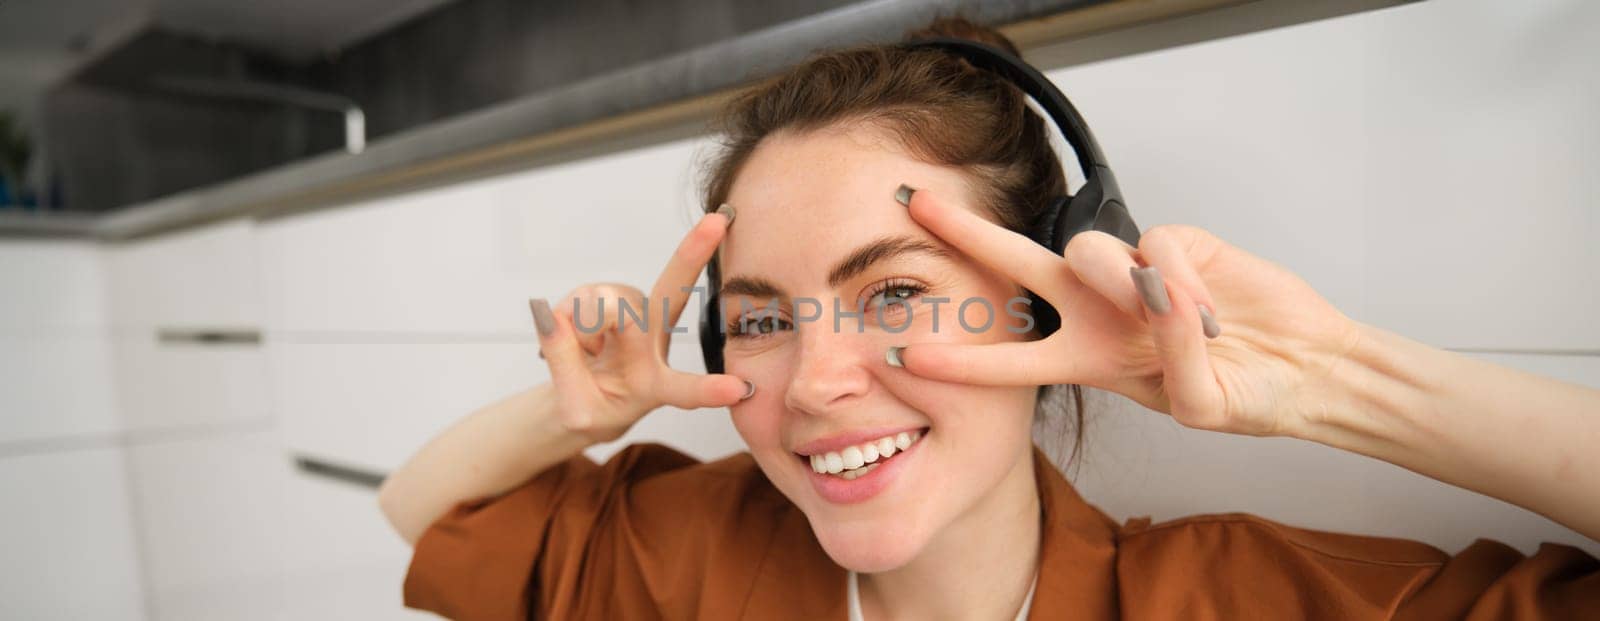 Close up of carefree young woman, laughing and smiling, showing peace, v-sign gesture, listening to music in wireless headphones.